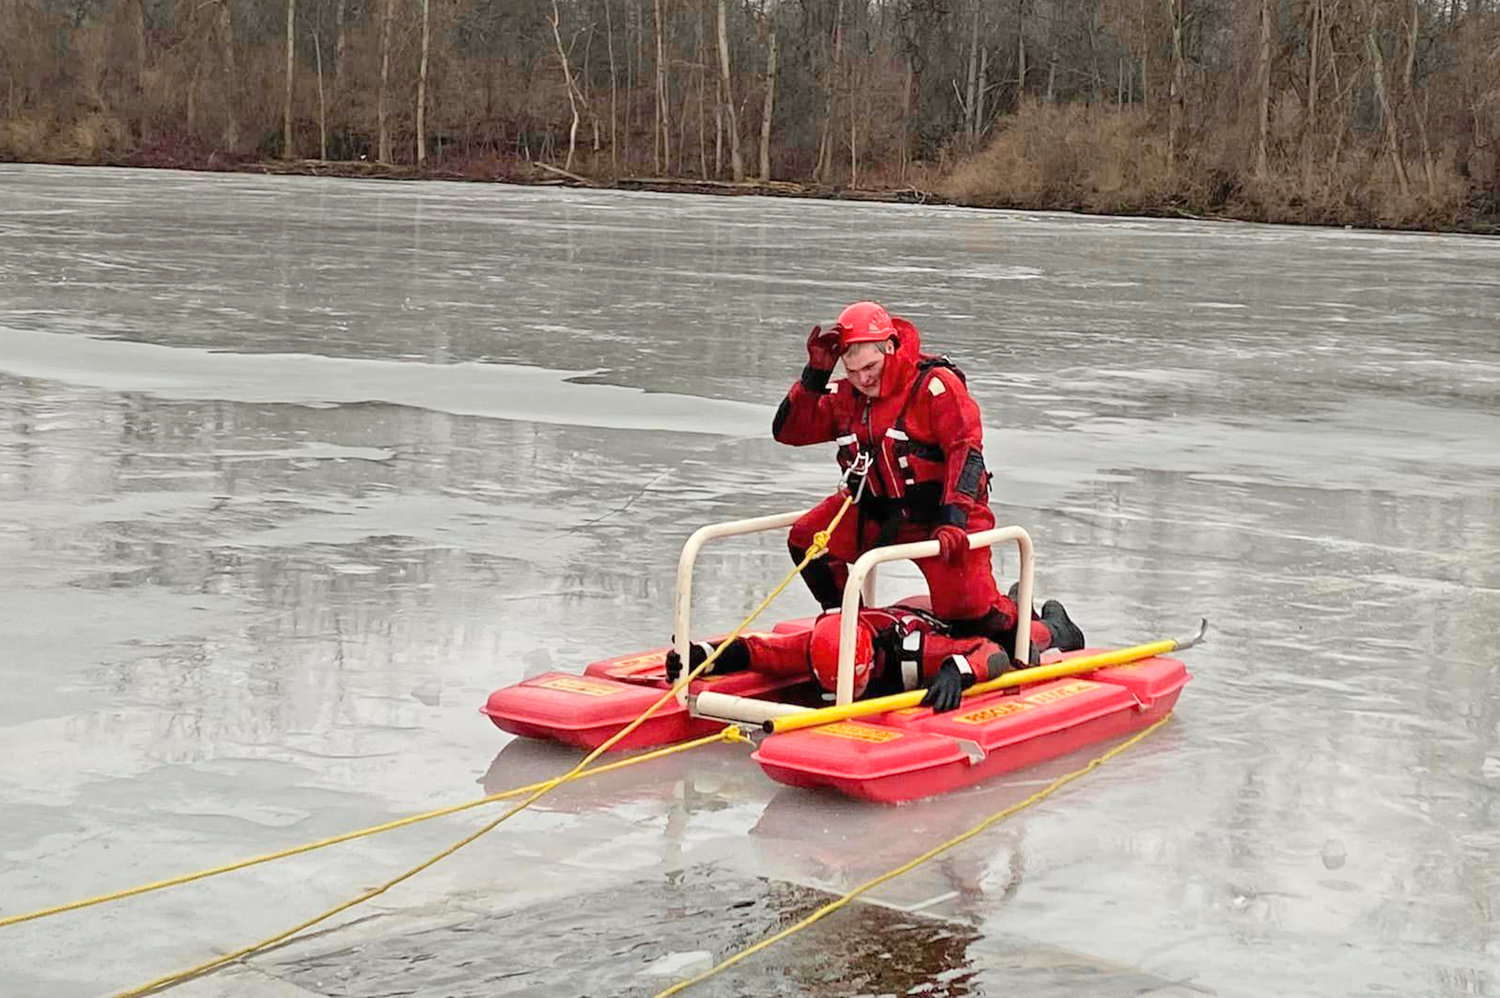 Rome firefighters ride their ice water rescue sled back to shore after a successful training exercise in the Barge Canal in Rome Tuesday afternoon.